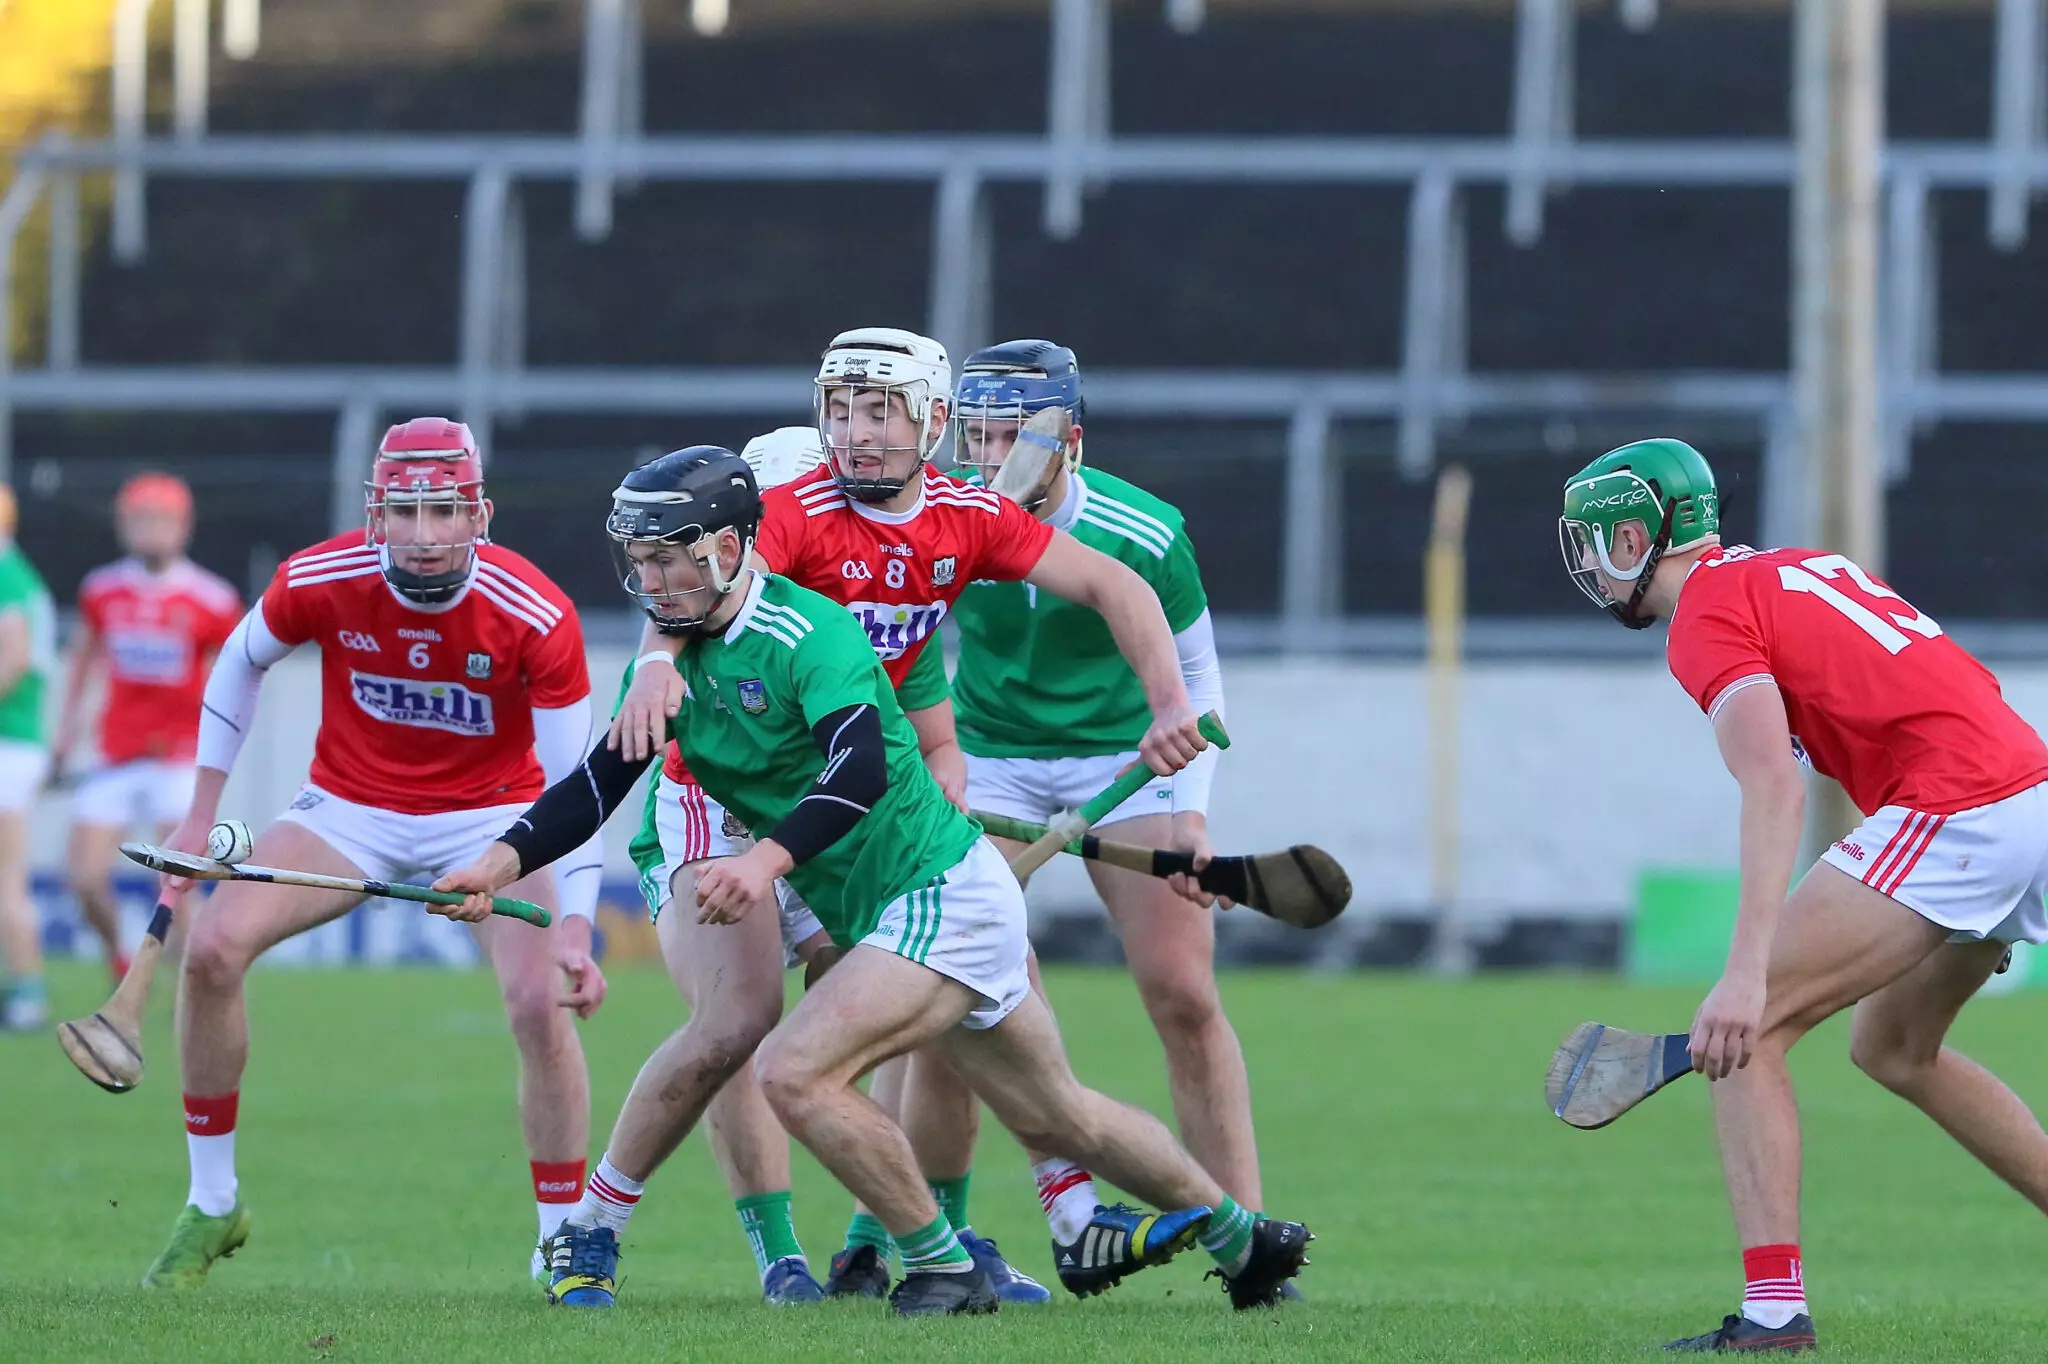 Hurling: Limerick team competes at the 2021 Munster minor championship. 2050x1370 HD Wallpaper.